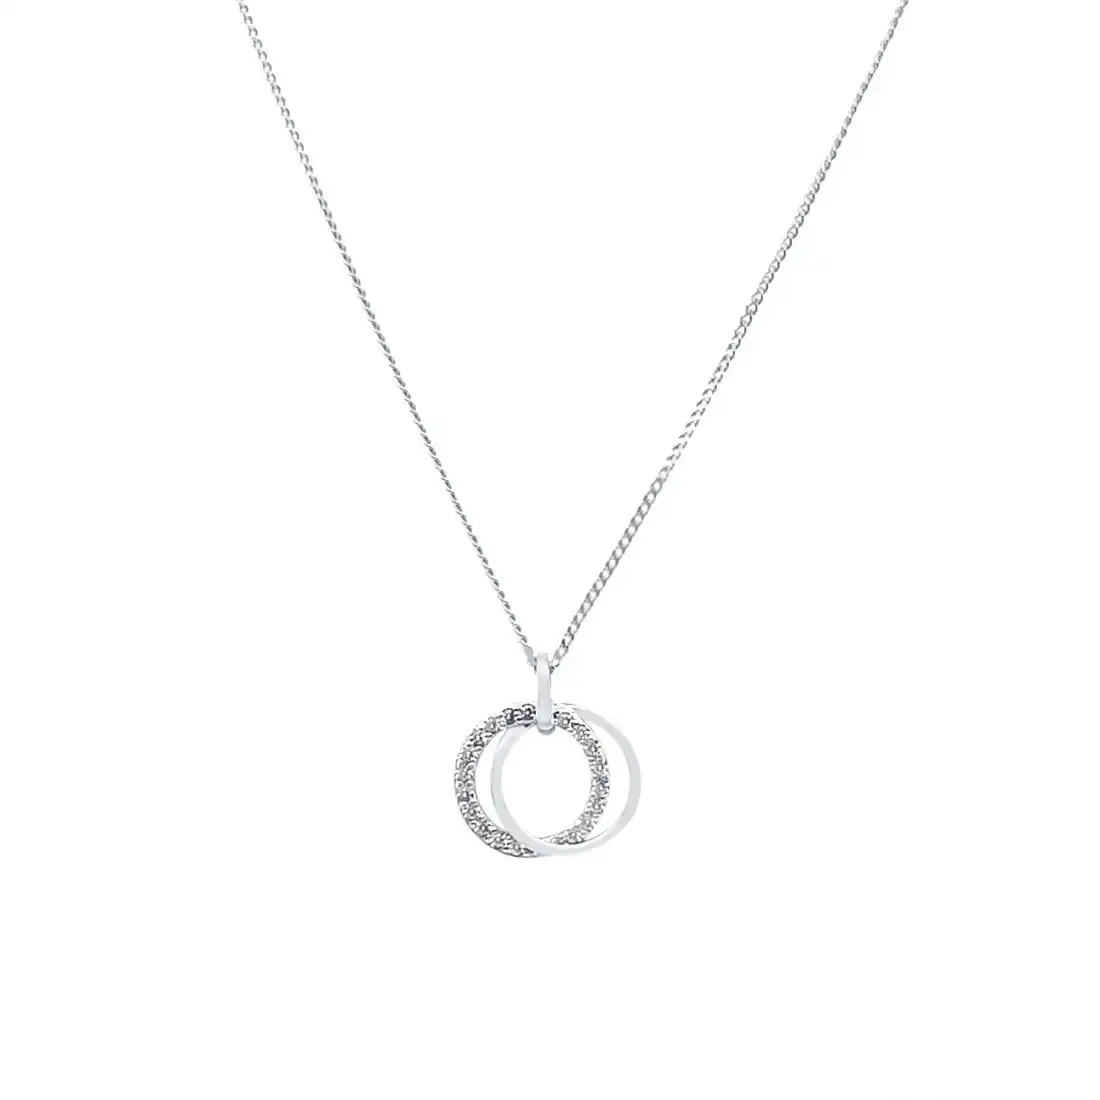 45cm Open Circle Necklace with Cubic Zirconia in Sterling Silver